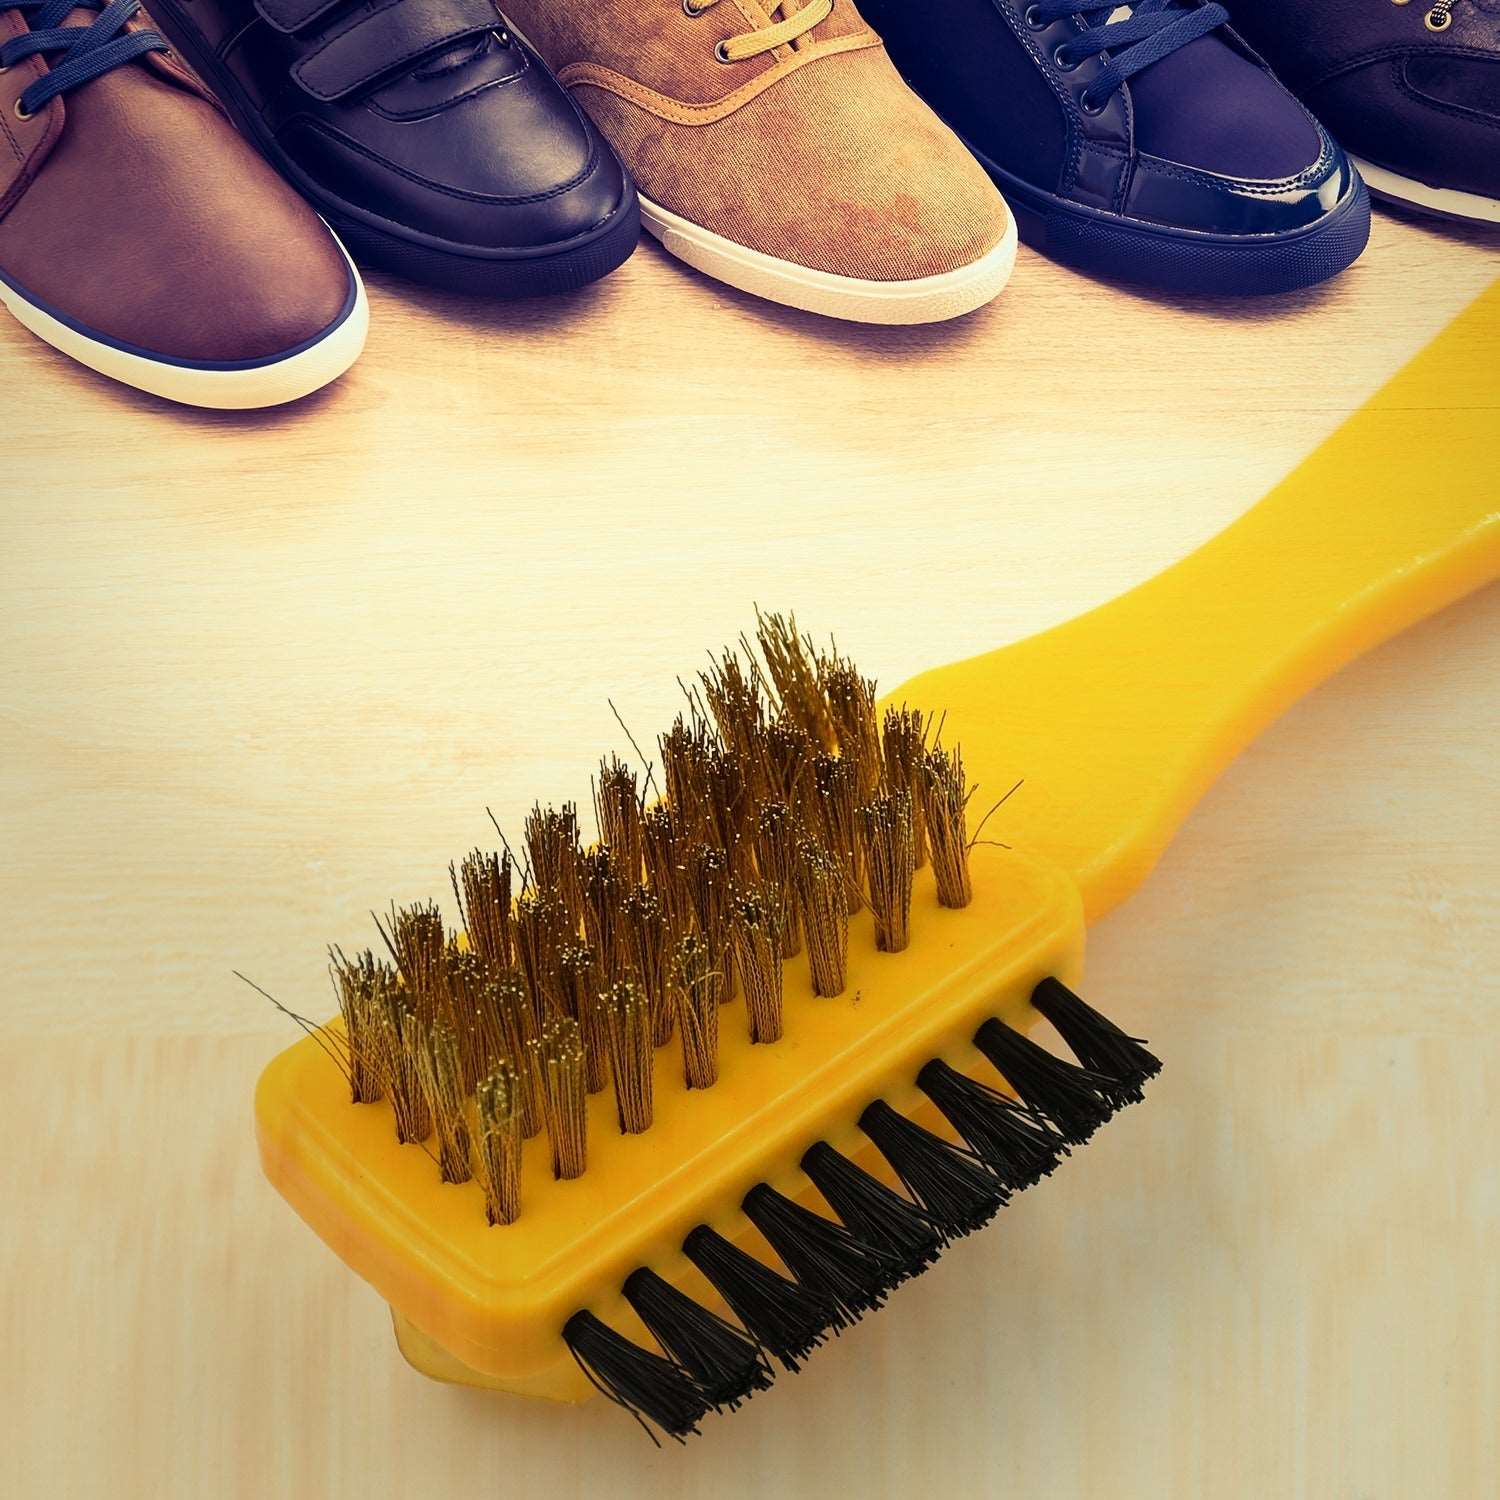 3 Side Portable Multifunctional shoe brush Rubber Home Suede Shoes Polishing Brushes 3 Side Shoe Cleaning Brush, Shoe Brush Excellent Quality and Popular